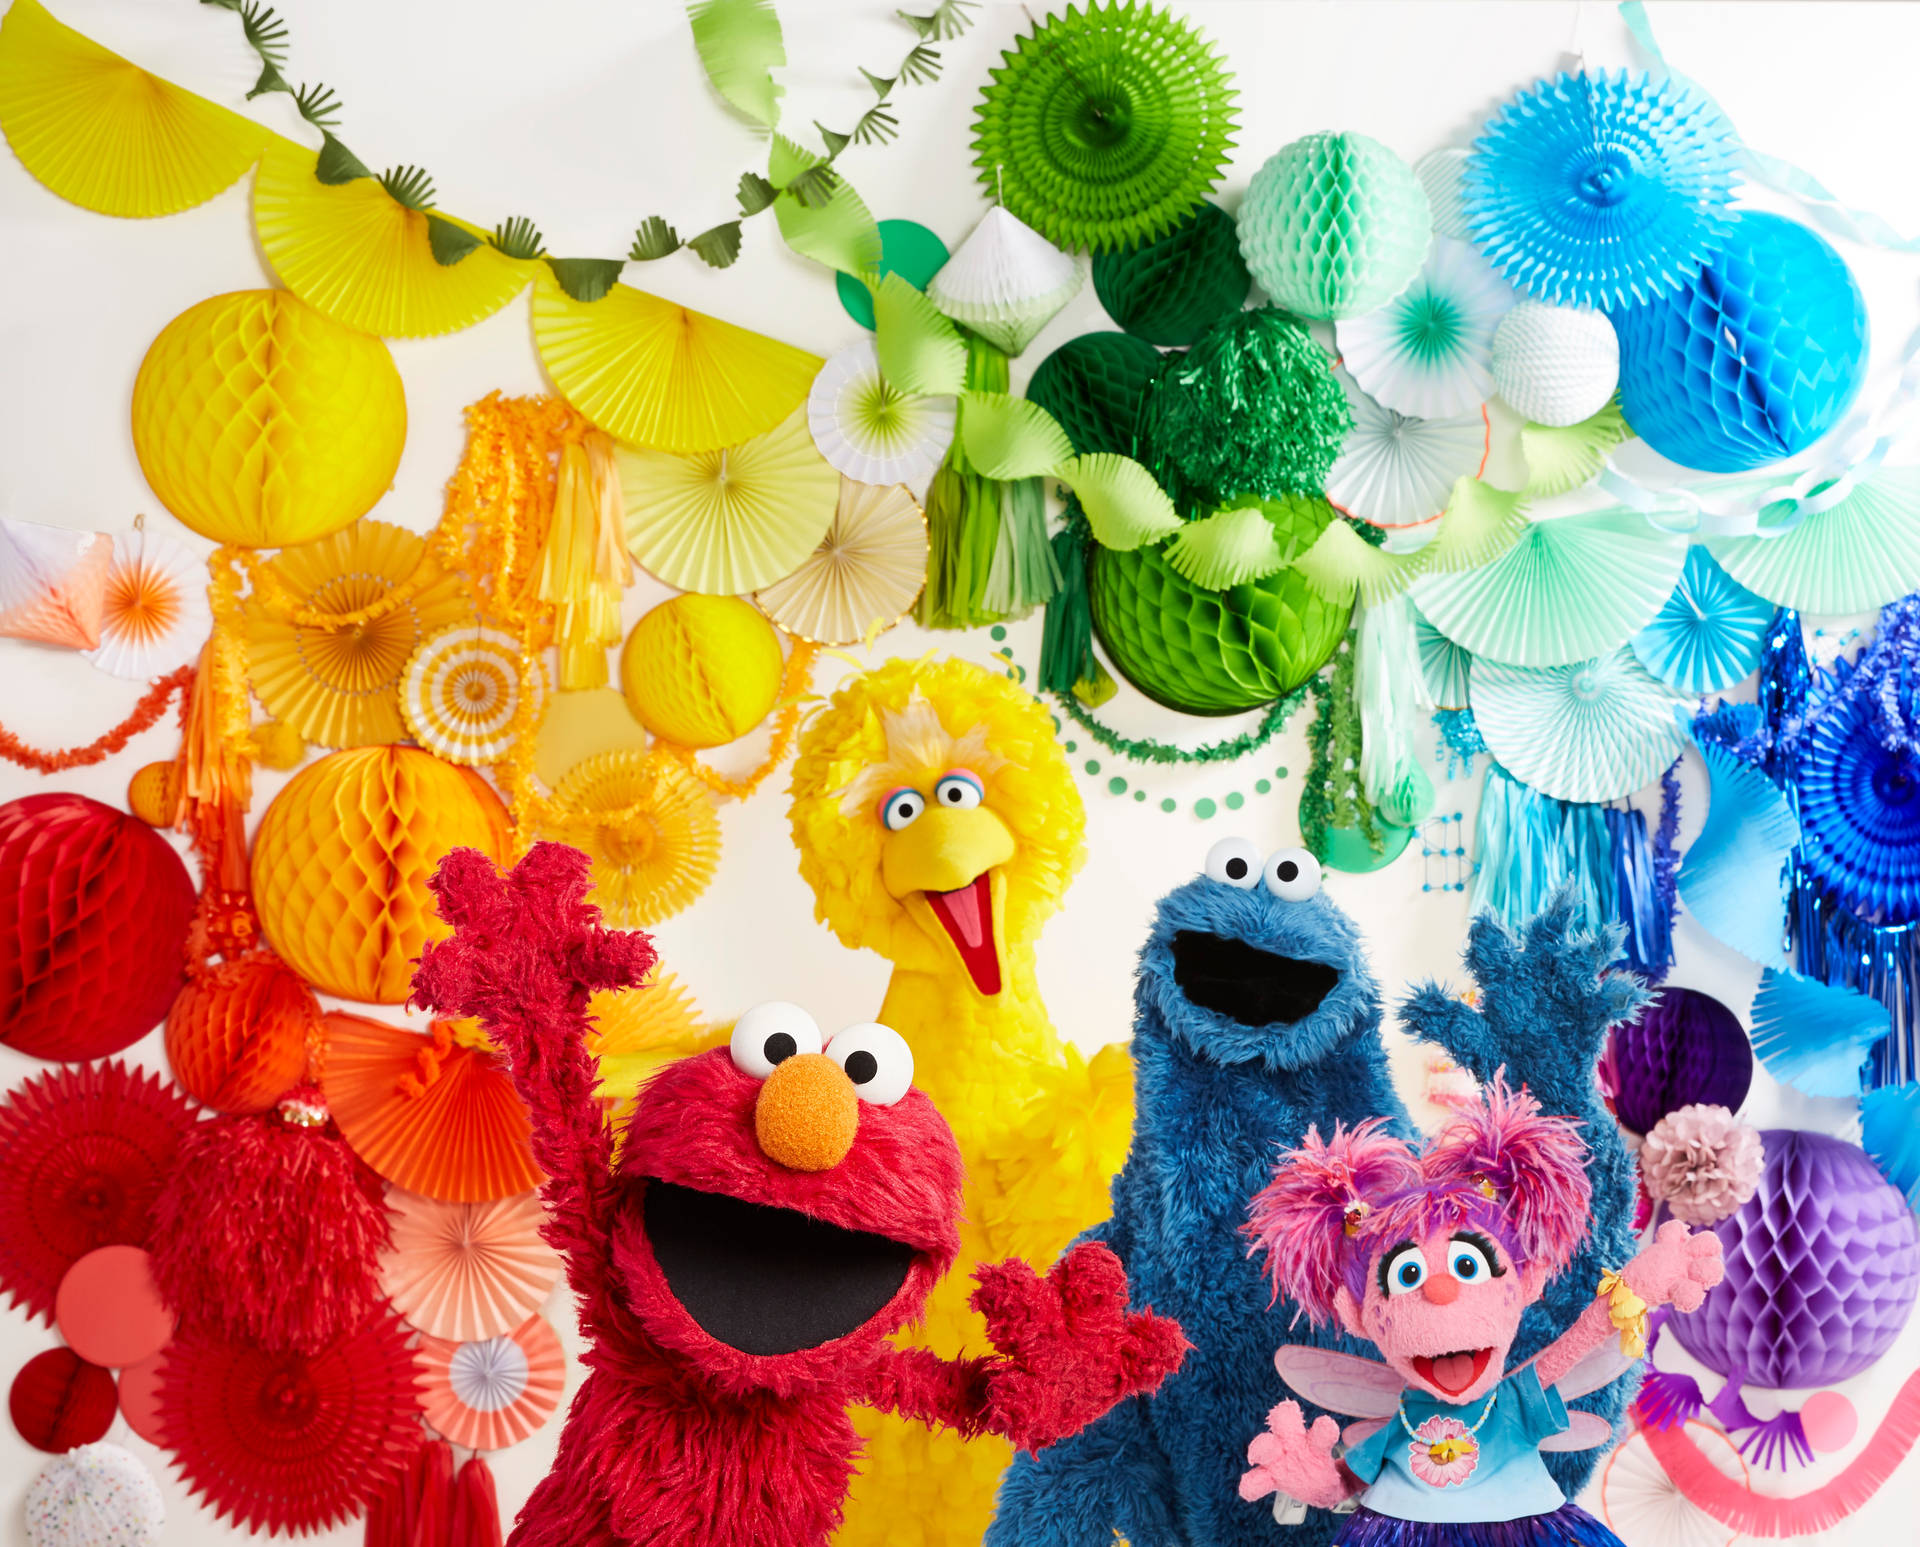 Elmo And Friends With Colorful Lanterns